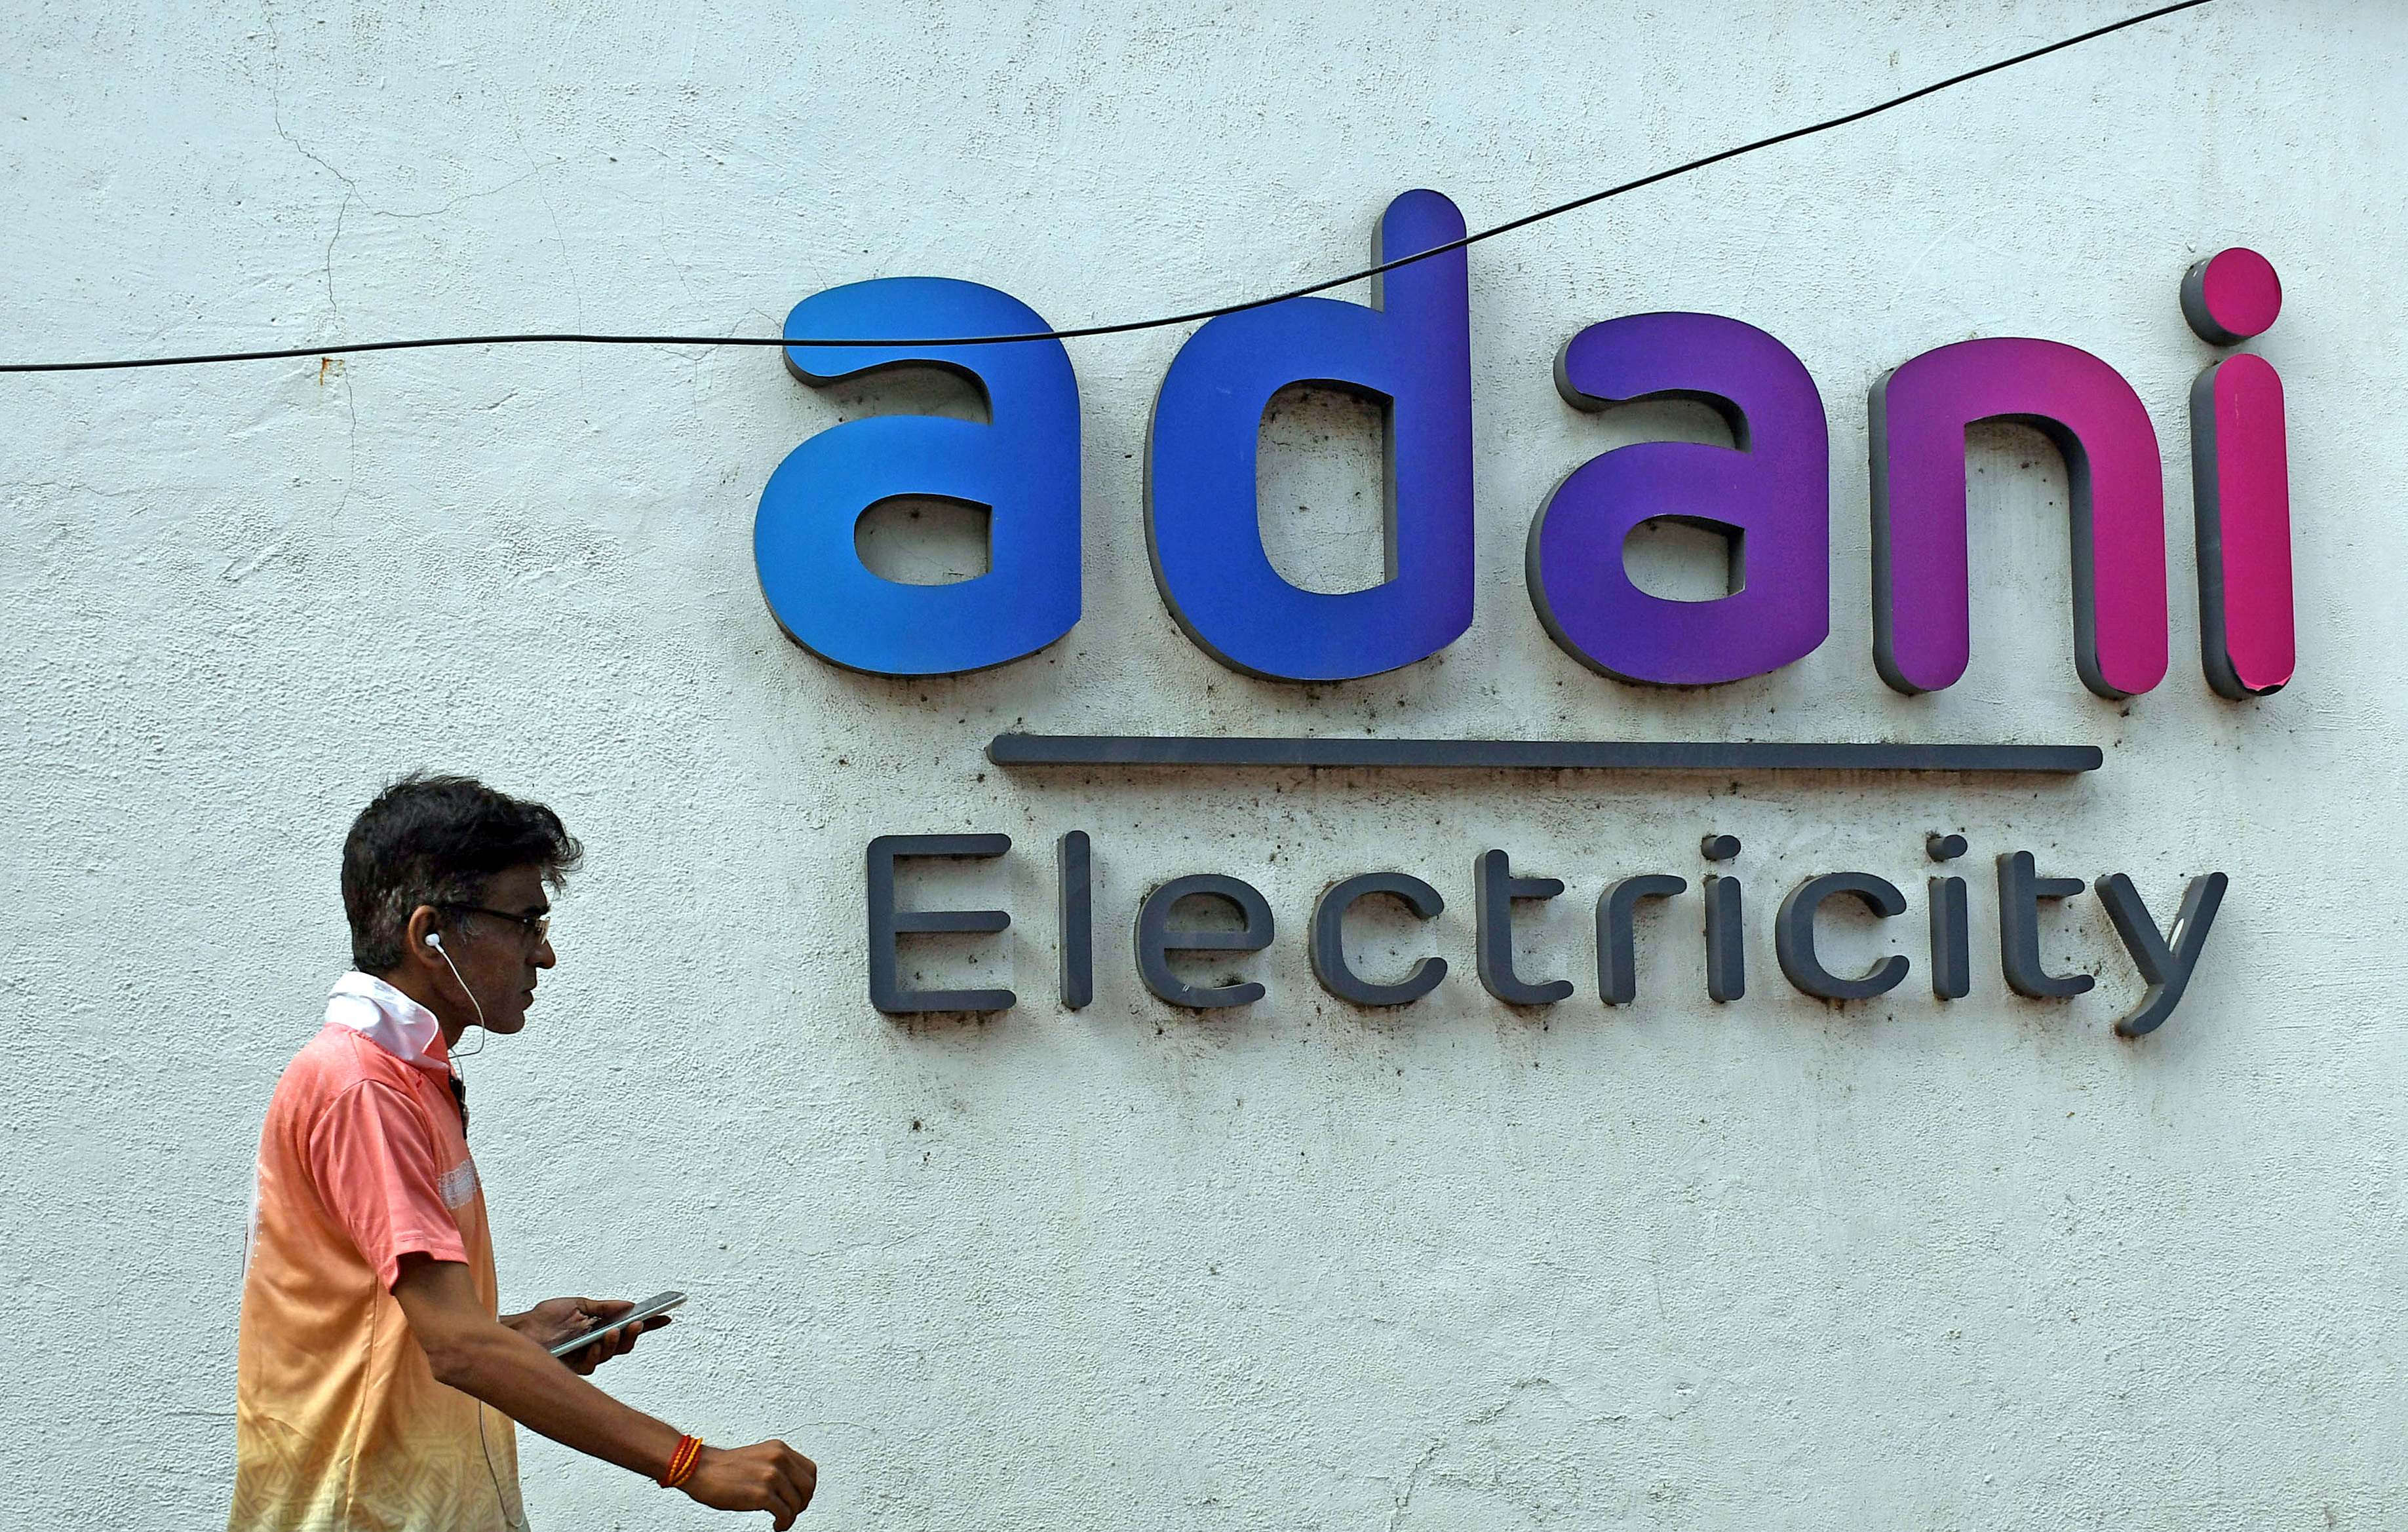 Adani Group shows improved cash reserves to service debts amid profits